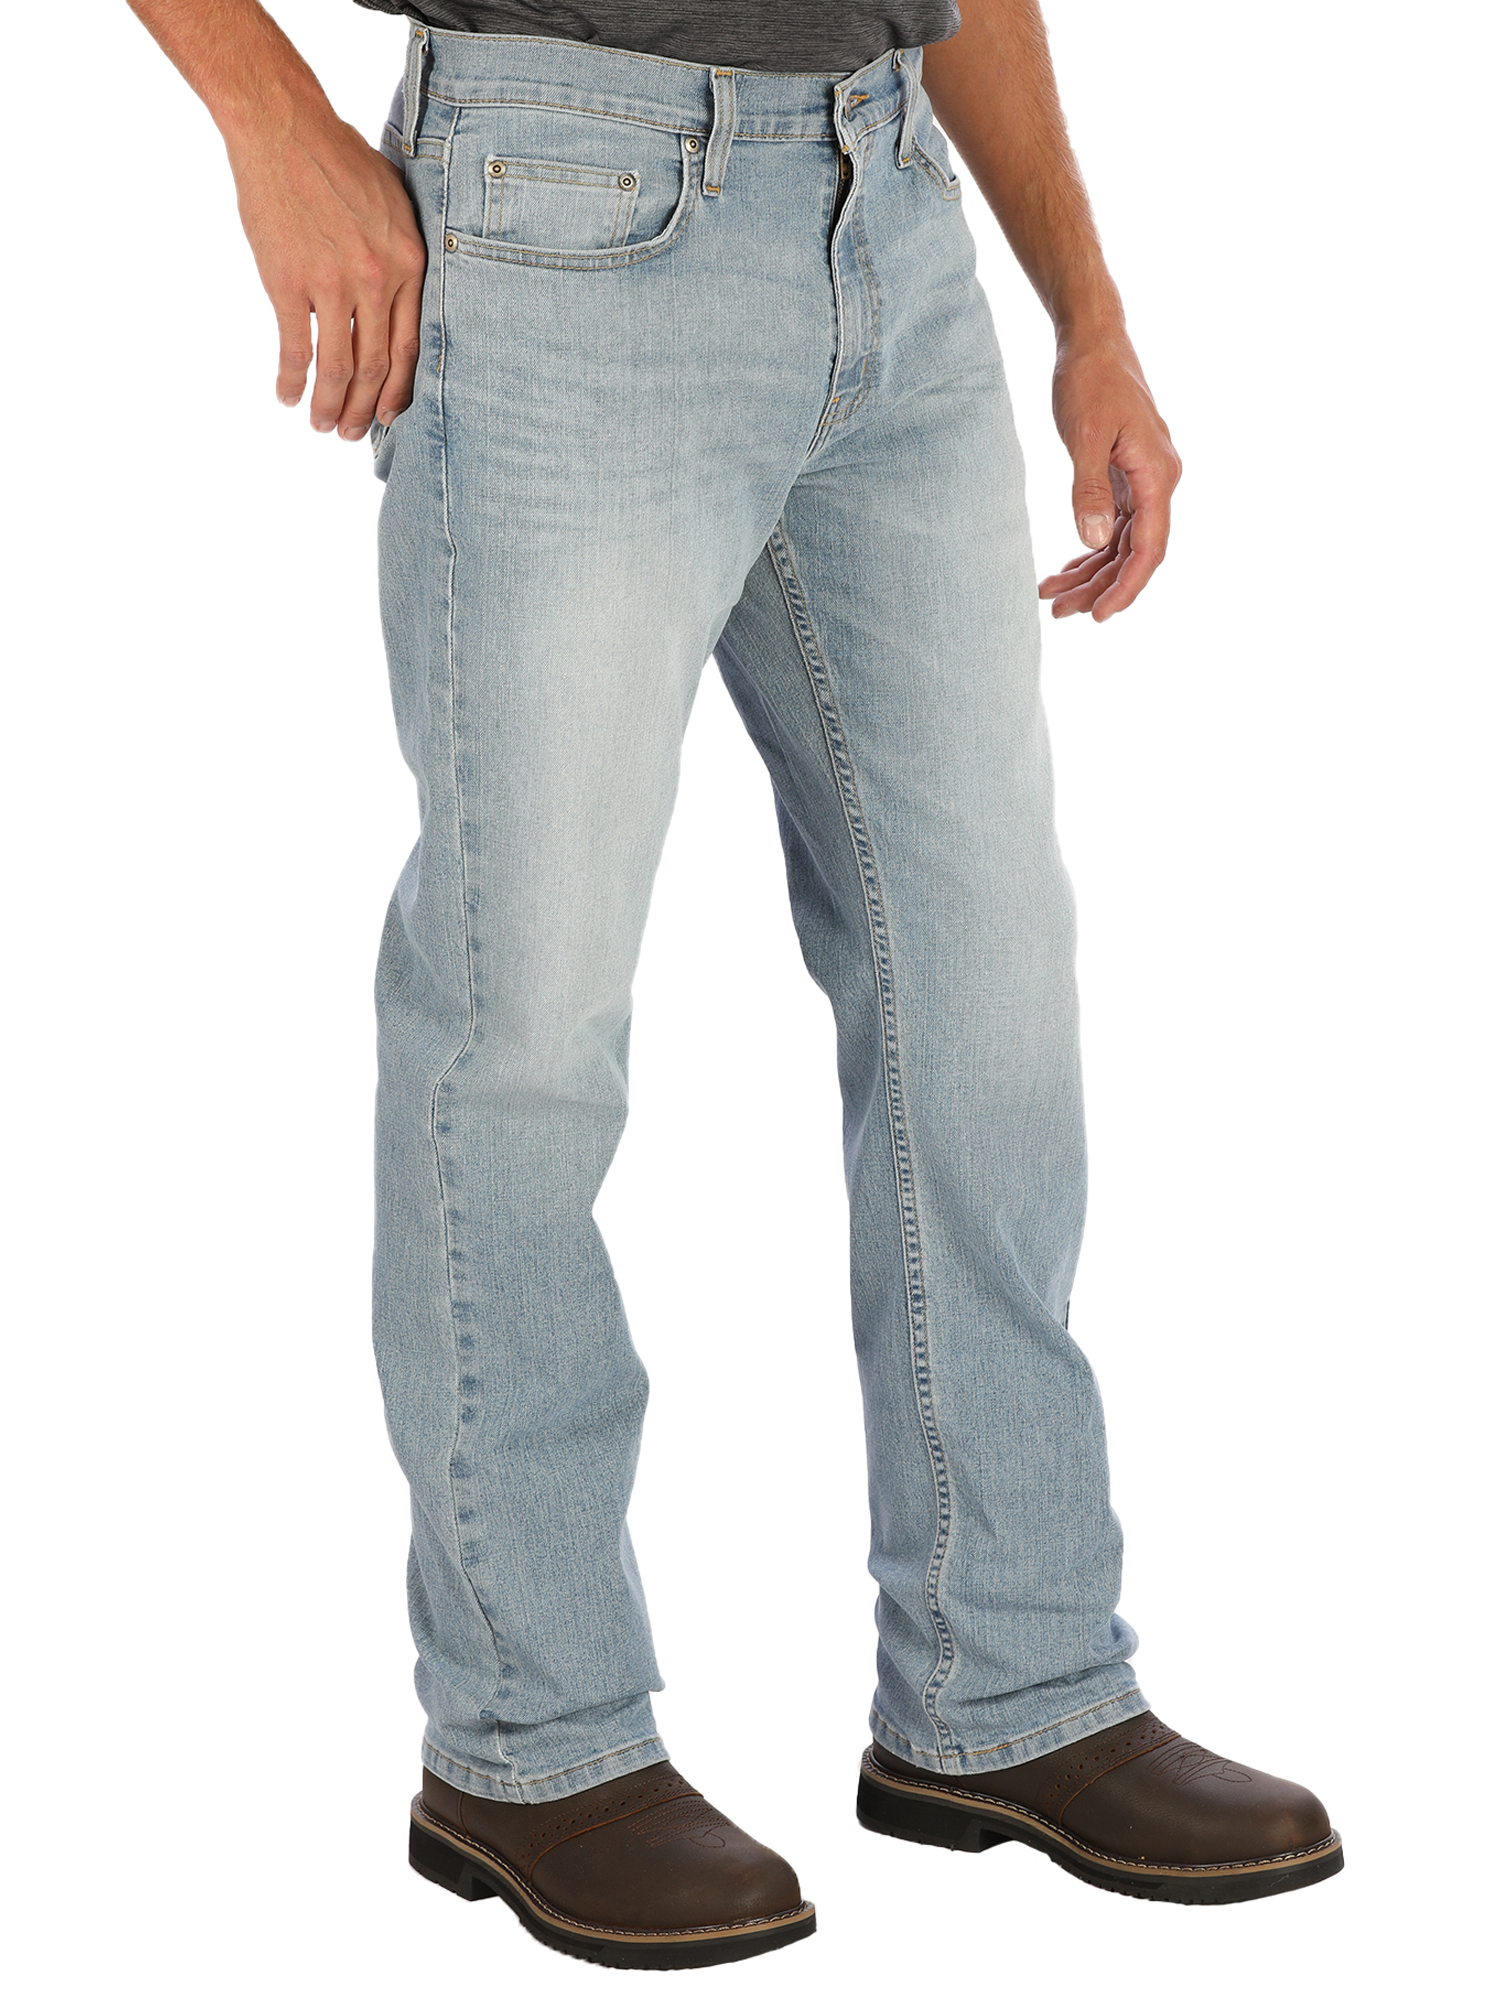 George Men's Bootcut Jeans - image 3 of 5